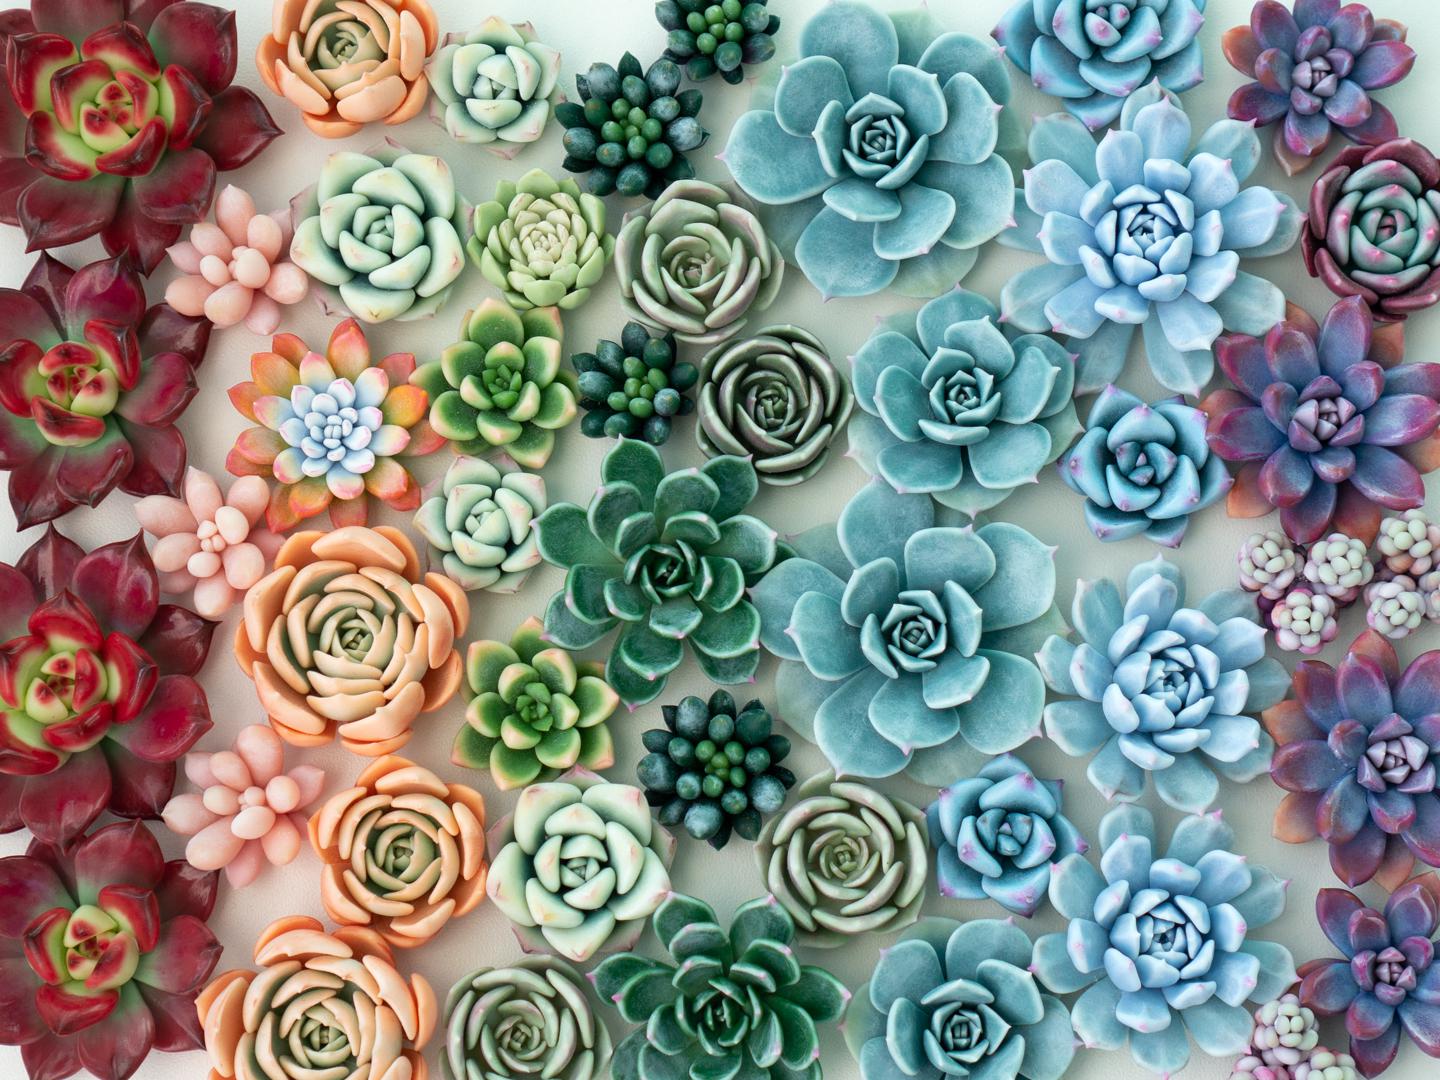 My polymer clay succulents :) This summer I had a goal to make a lot of brooches in different colors to make a rainbow. Today I saw this photo in the archive